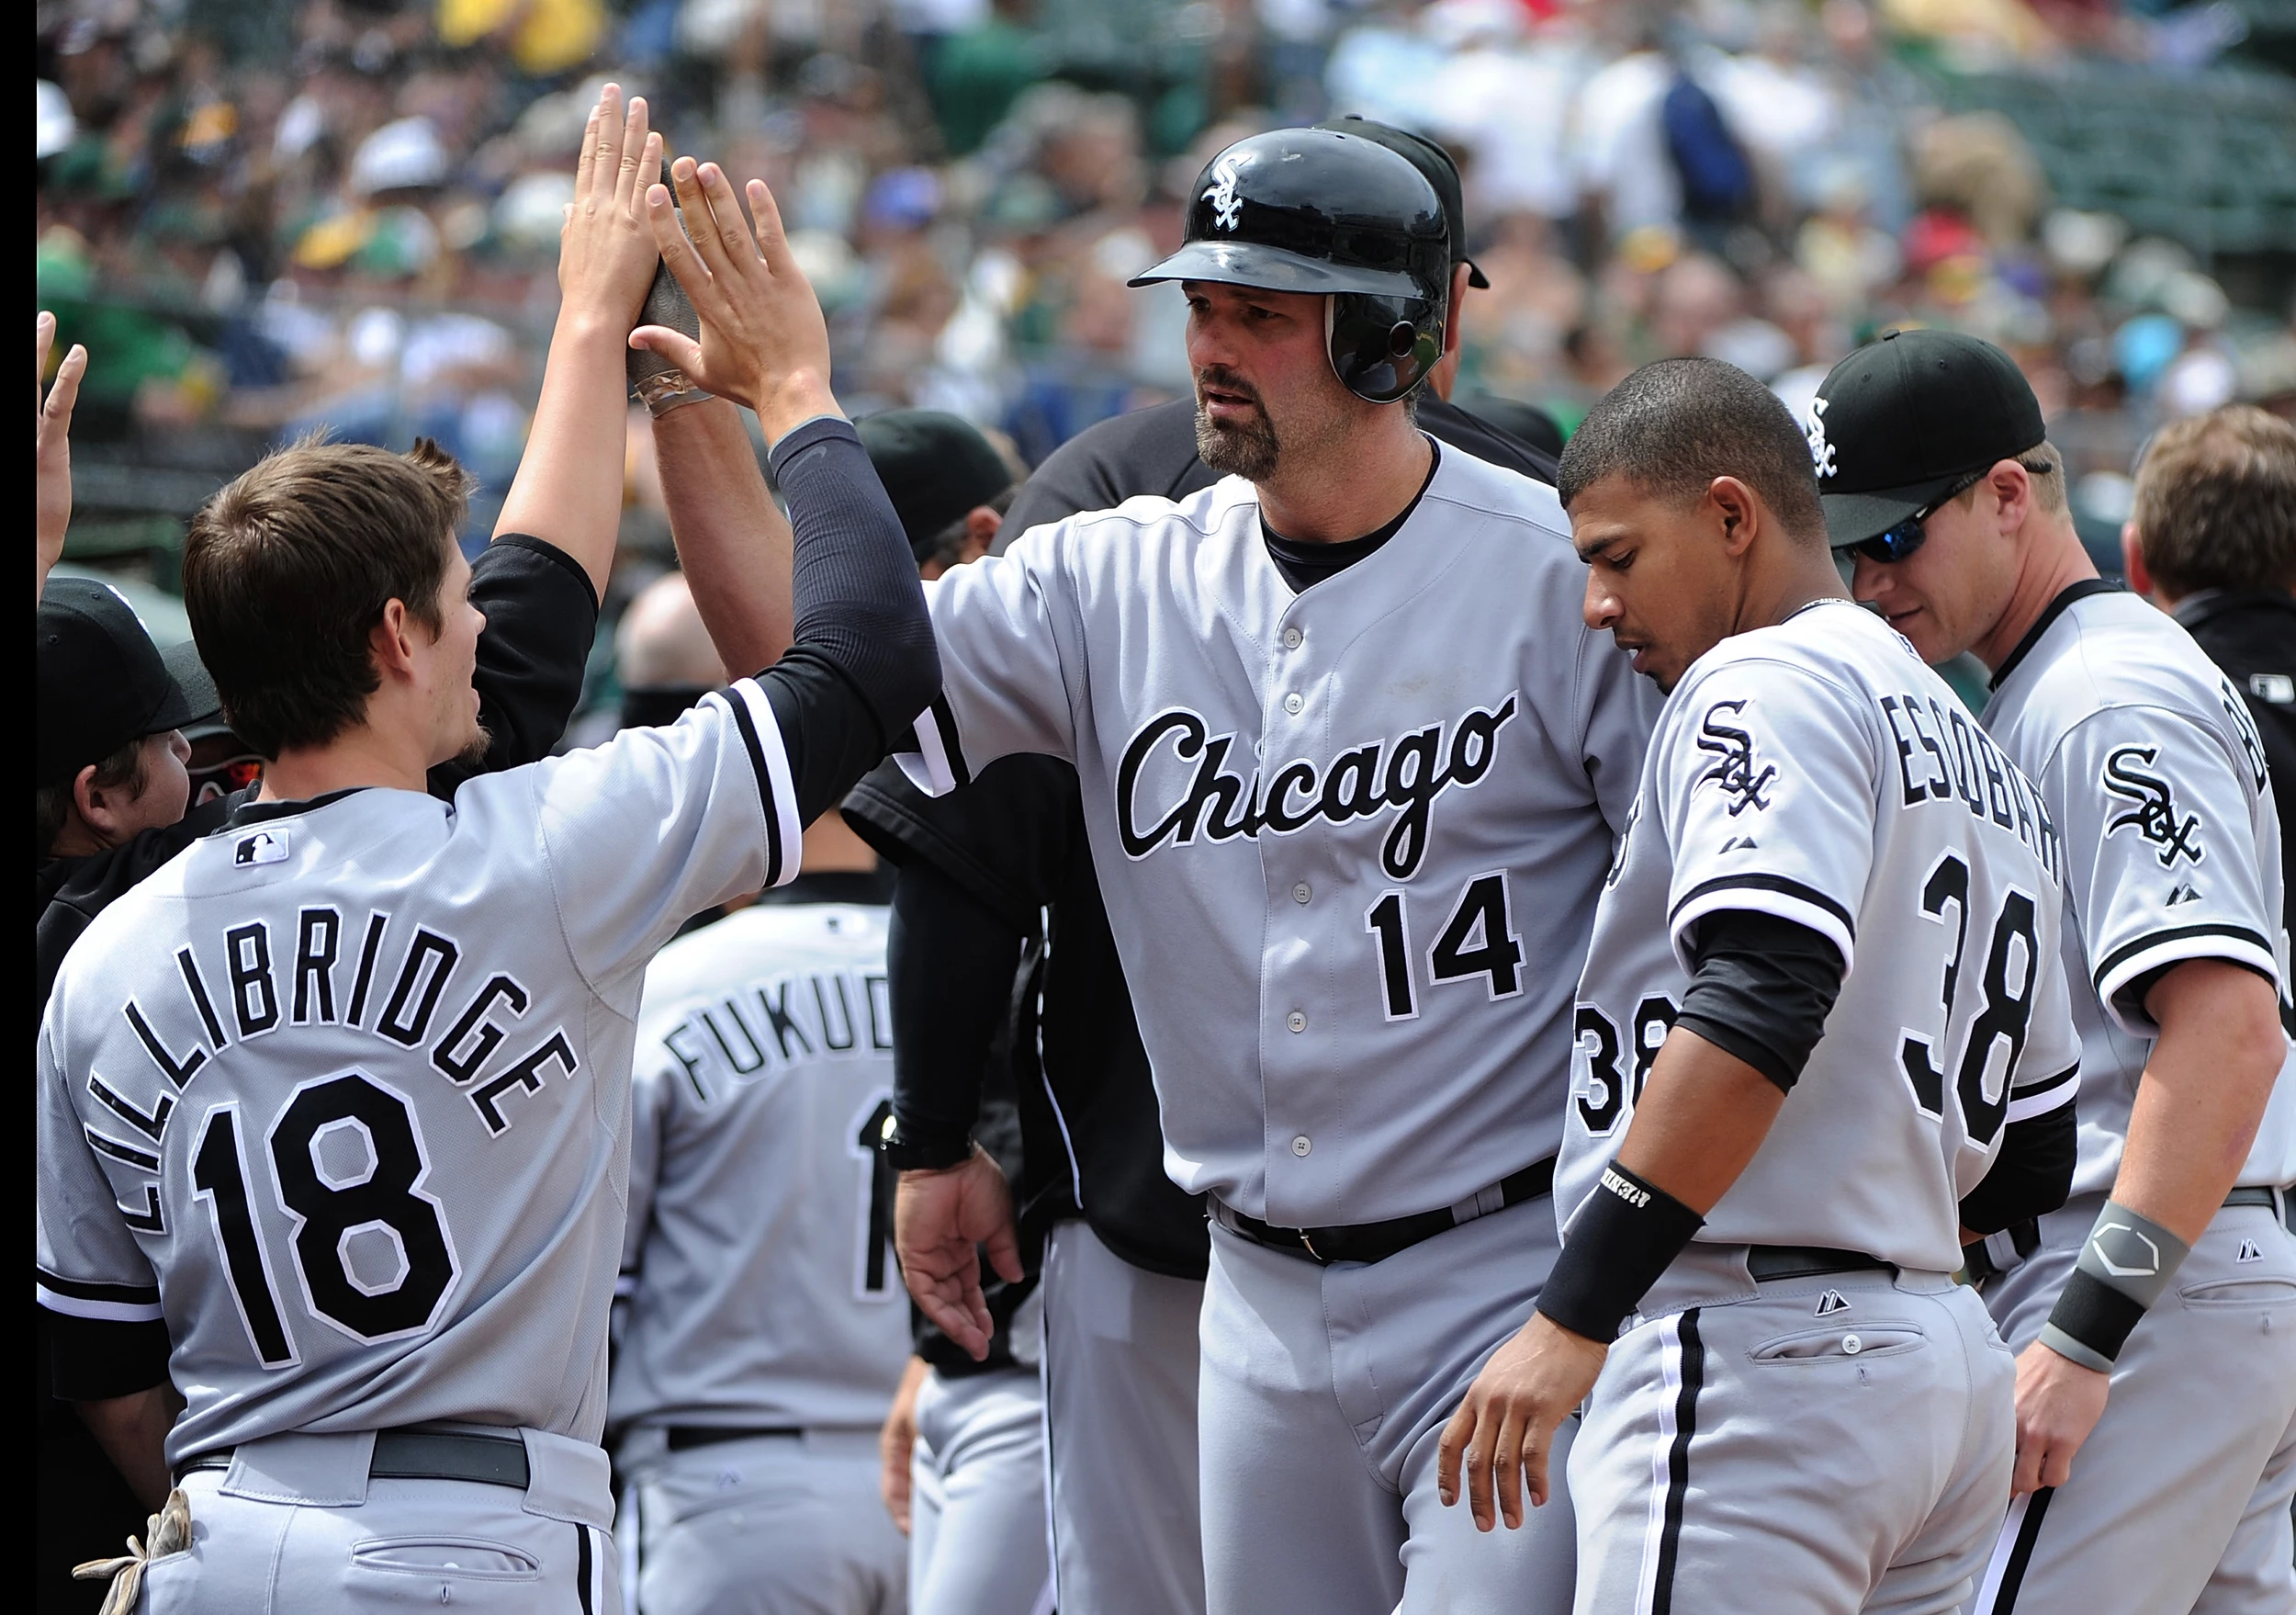 See You in September For “The Month of Konerko”, by Chicago White Sox